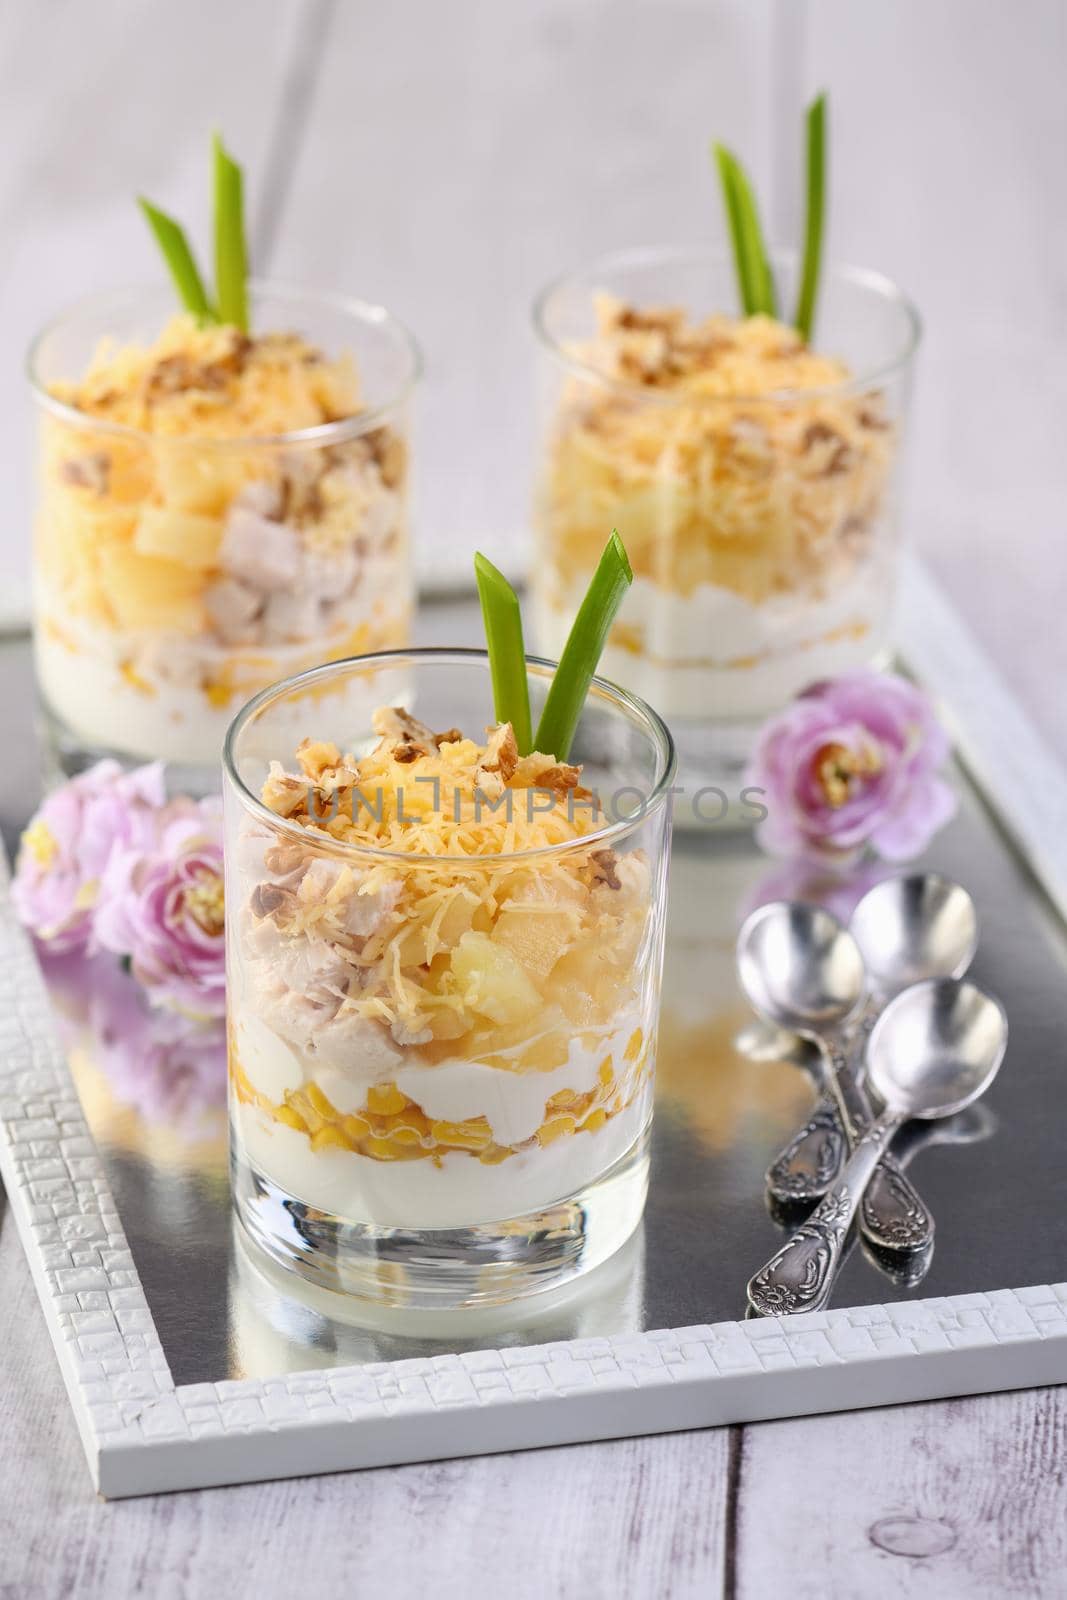 Chicken salad in a glass by Apolonia